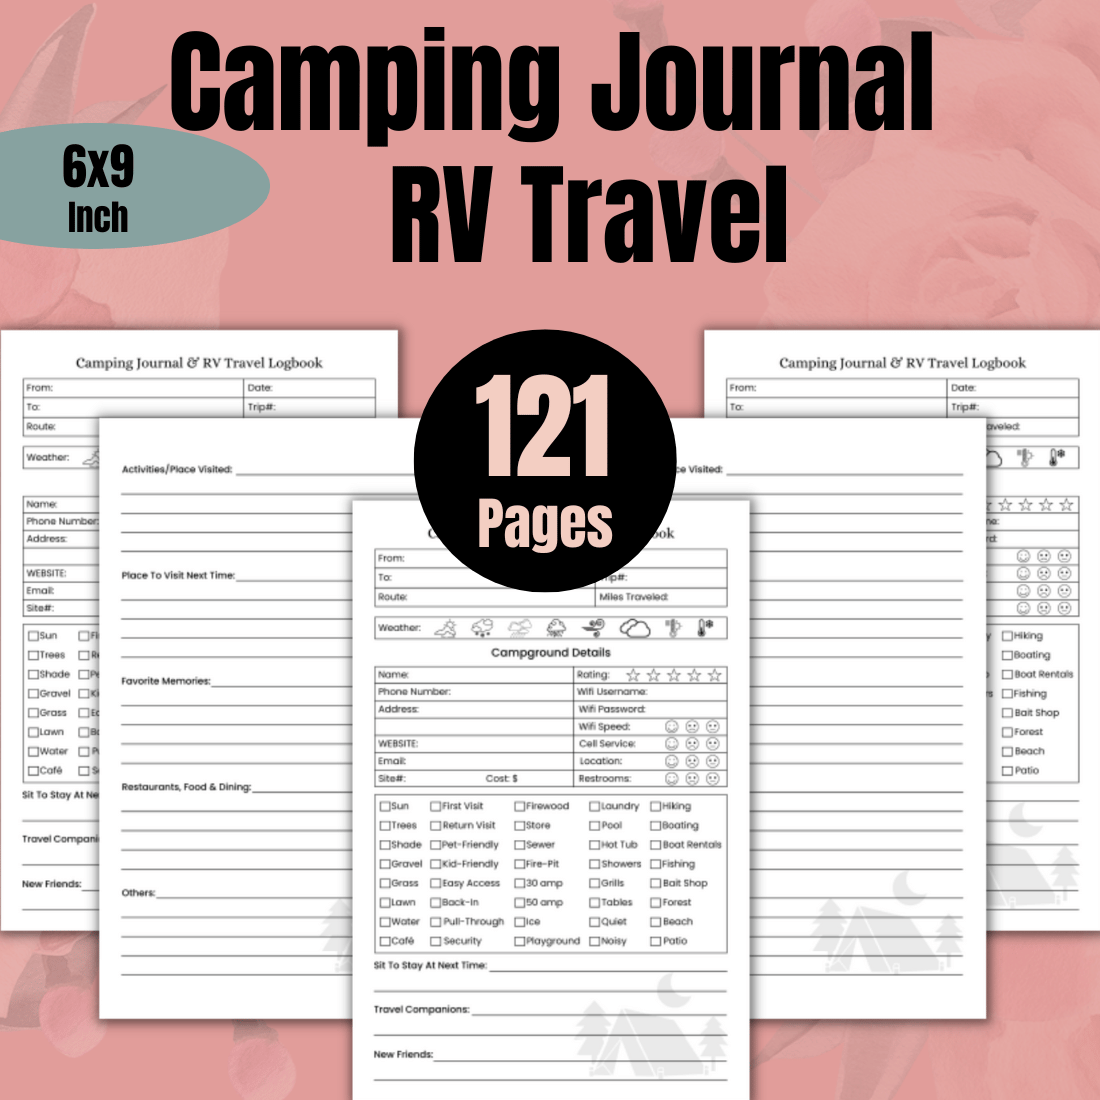 Camping Journal & RV Travel Logbook Planner KDP Interior main cover